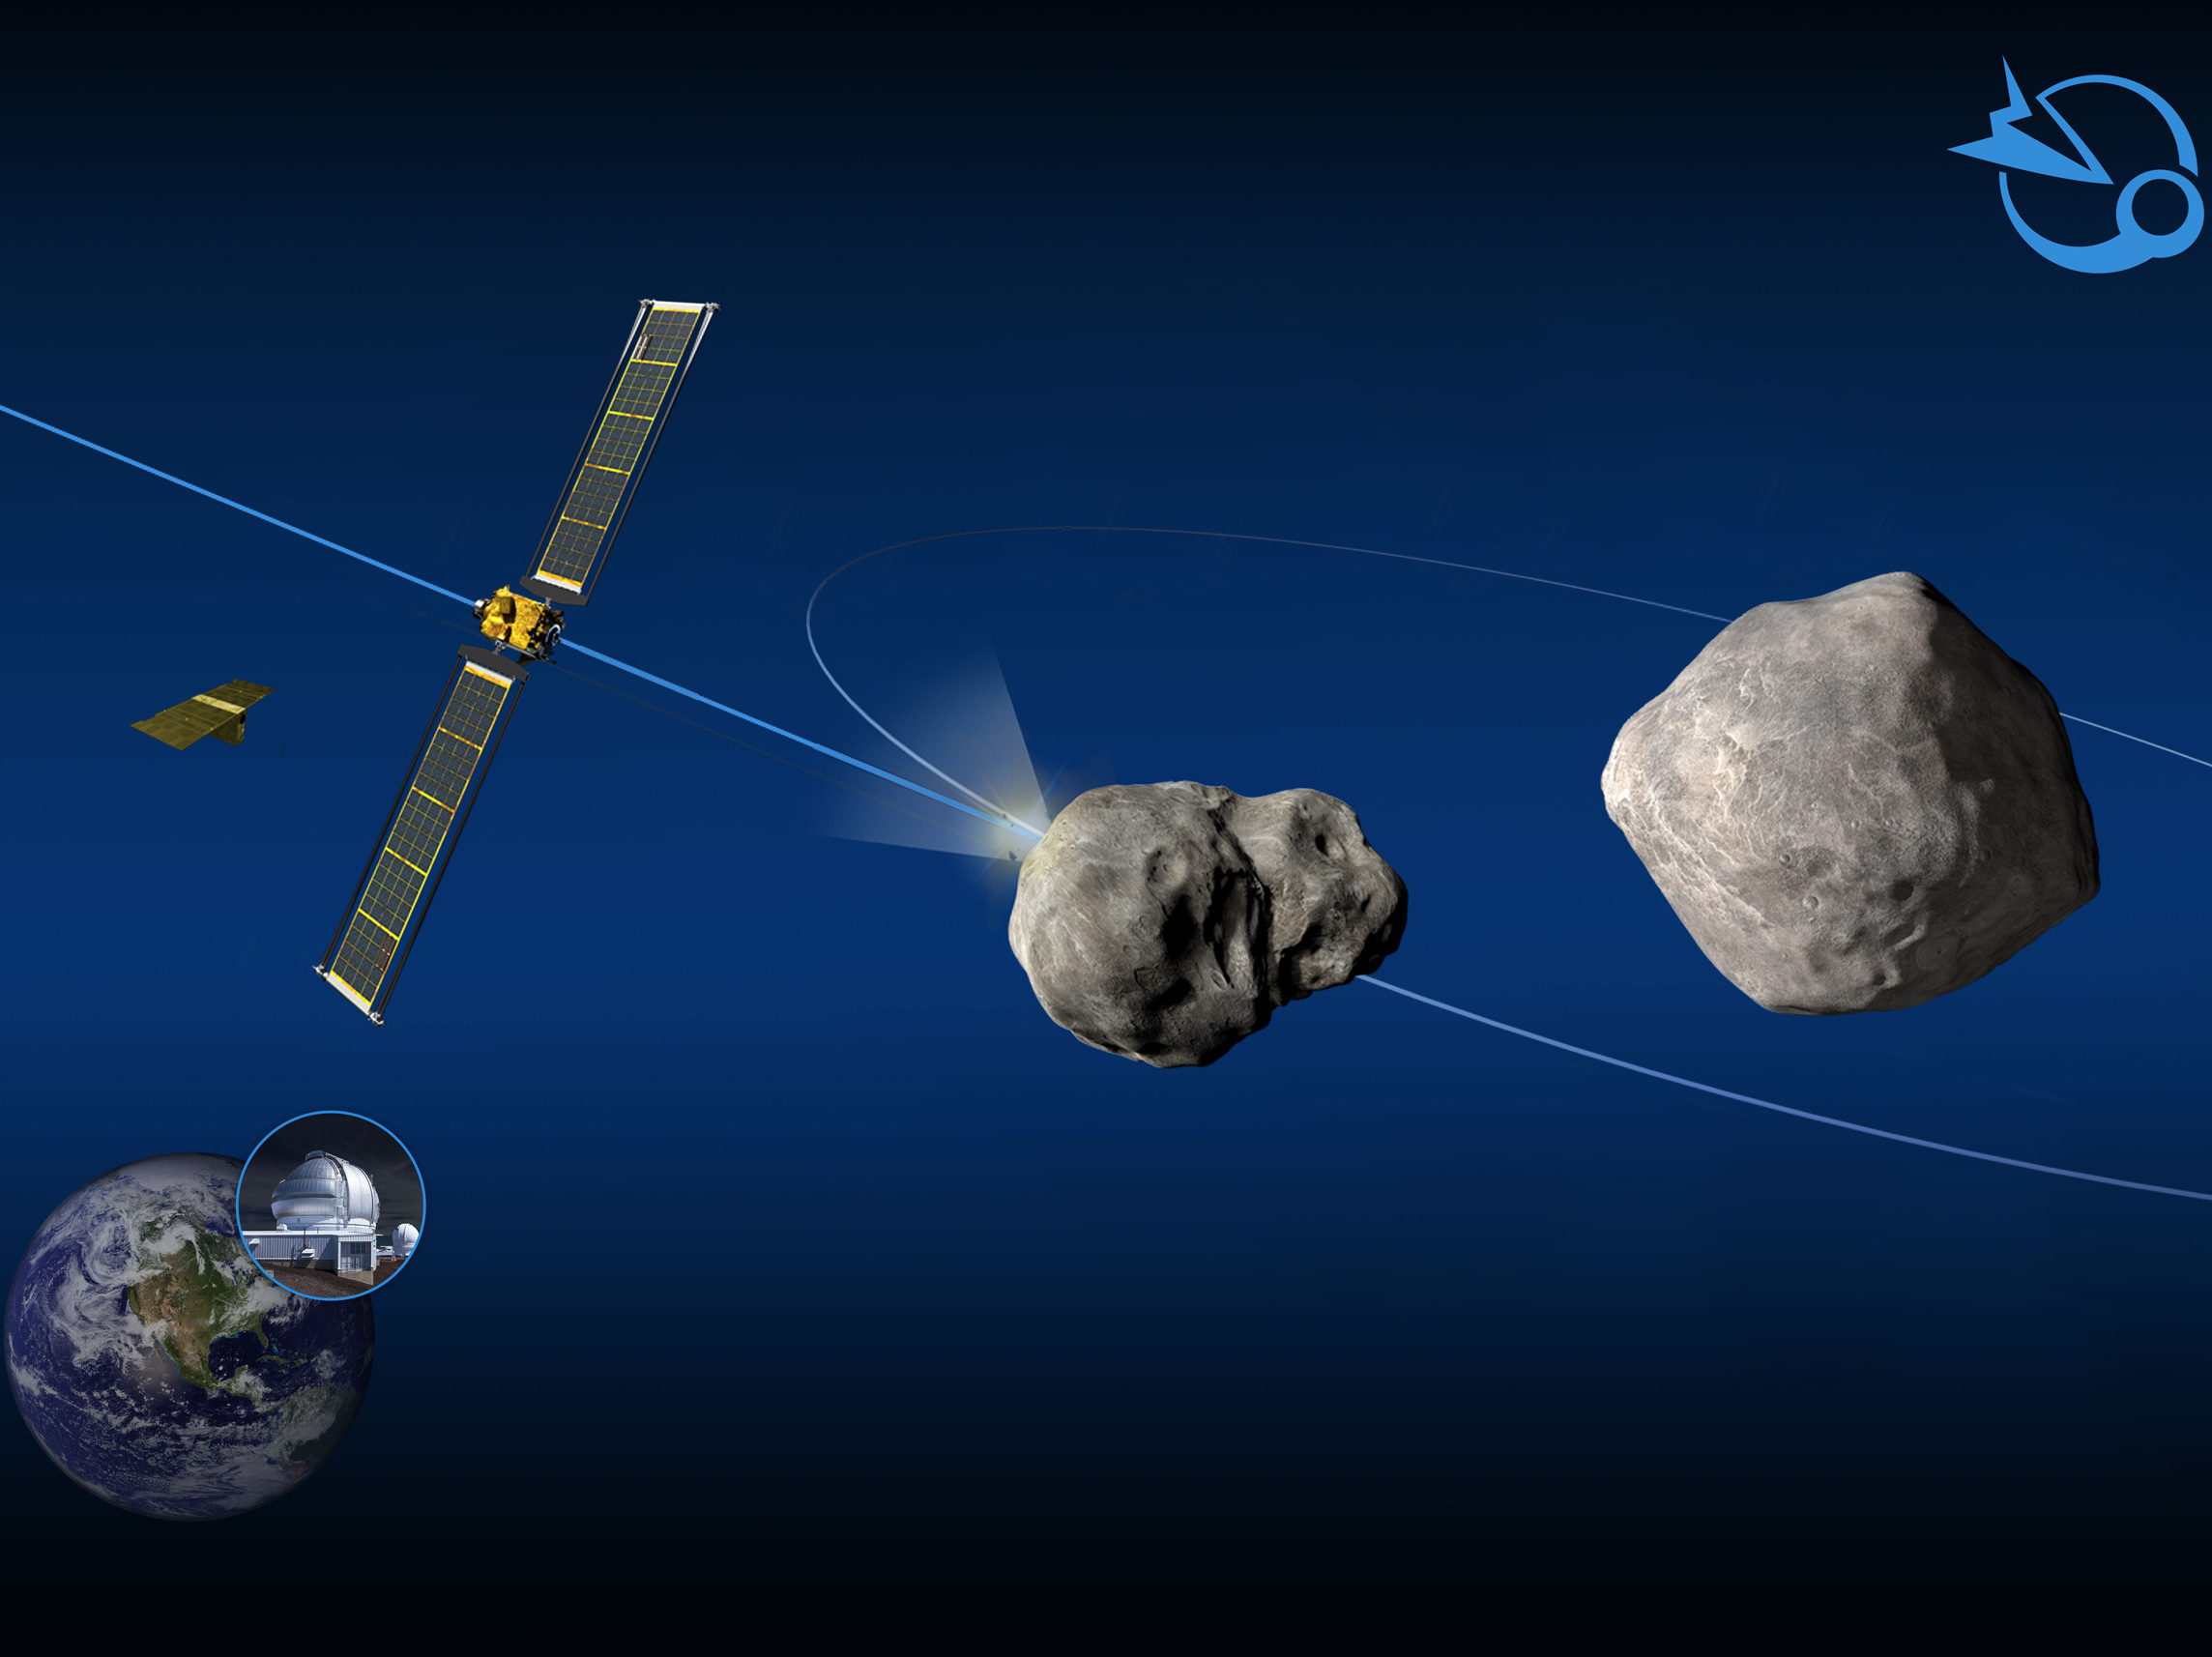 An illustration of asteroids and a spacecraft.